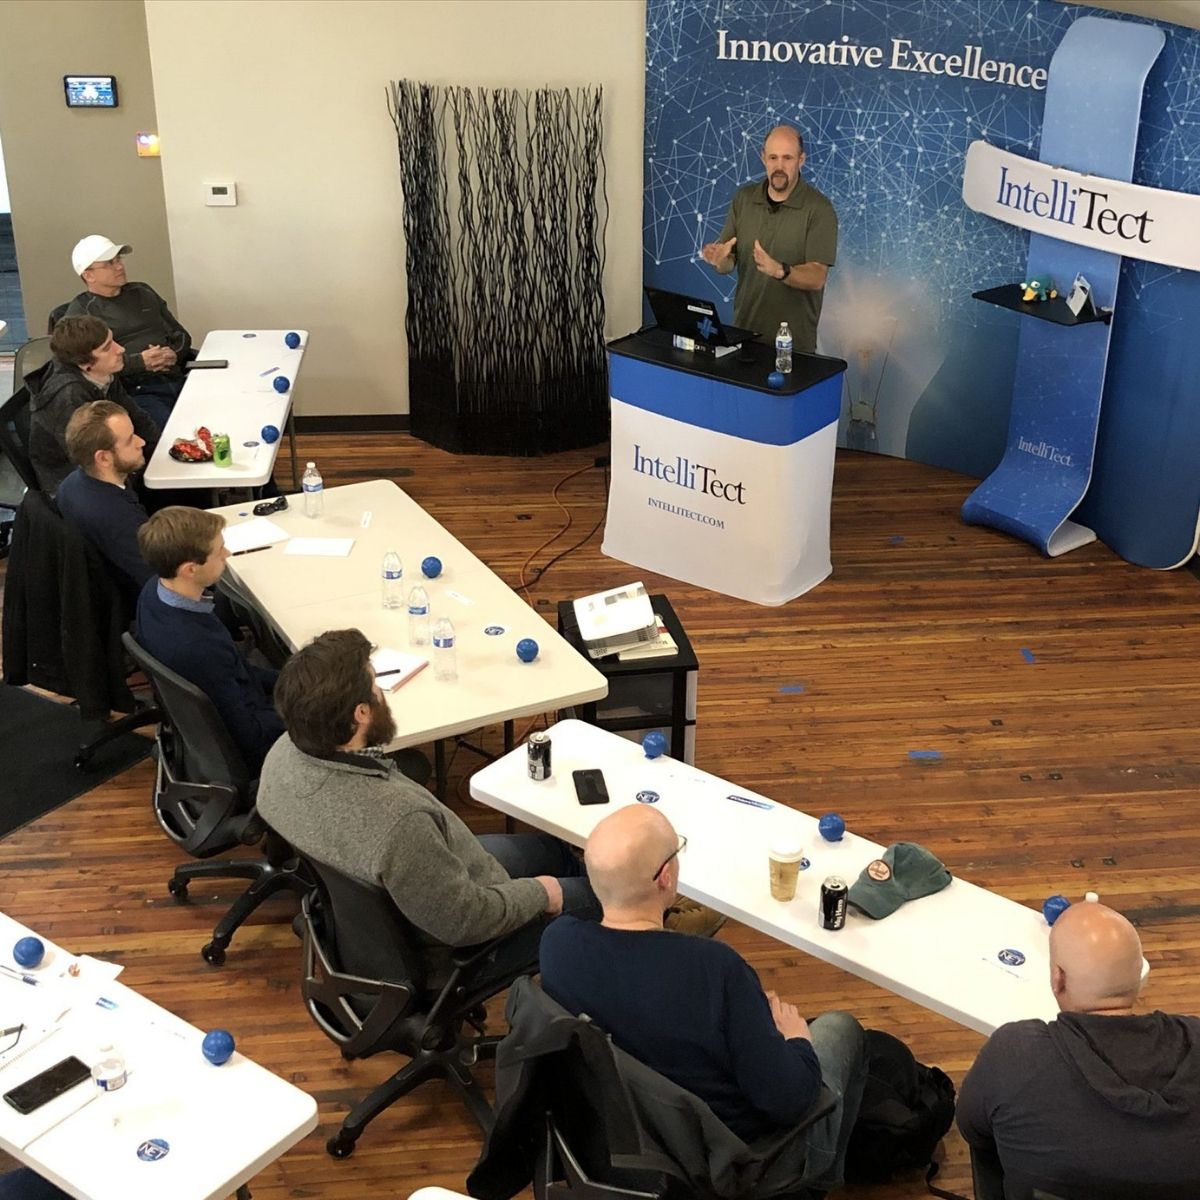 Grant Erickson, IntelliTect CTO, stands behind a white and blue podium presenting to a room of developers seated at white tables